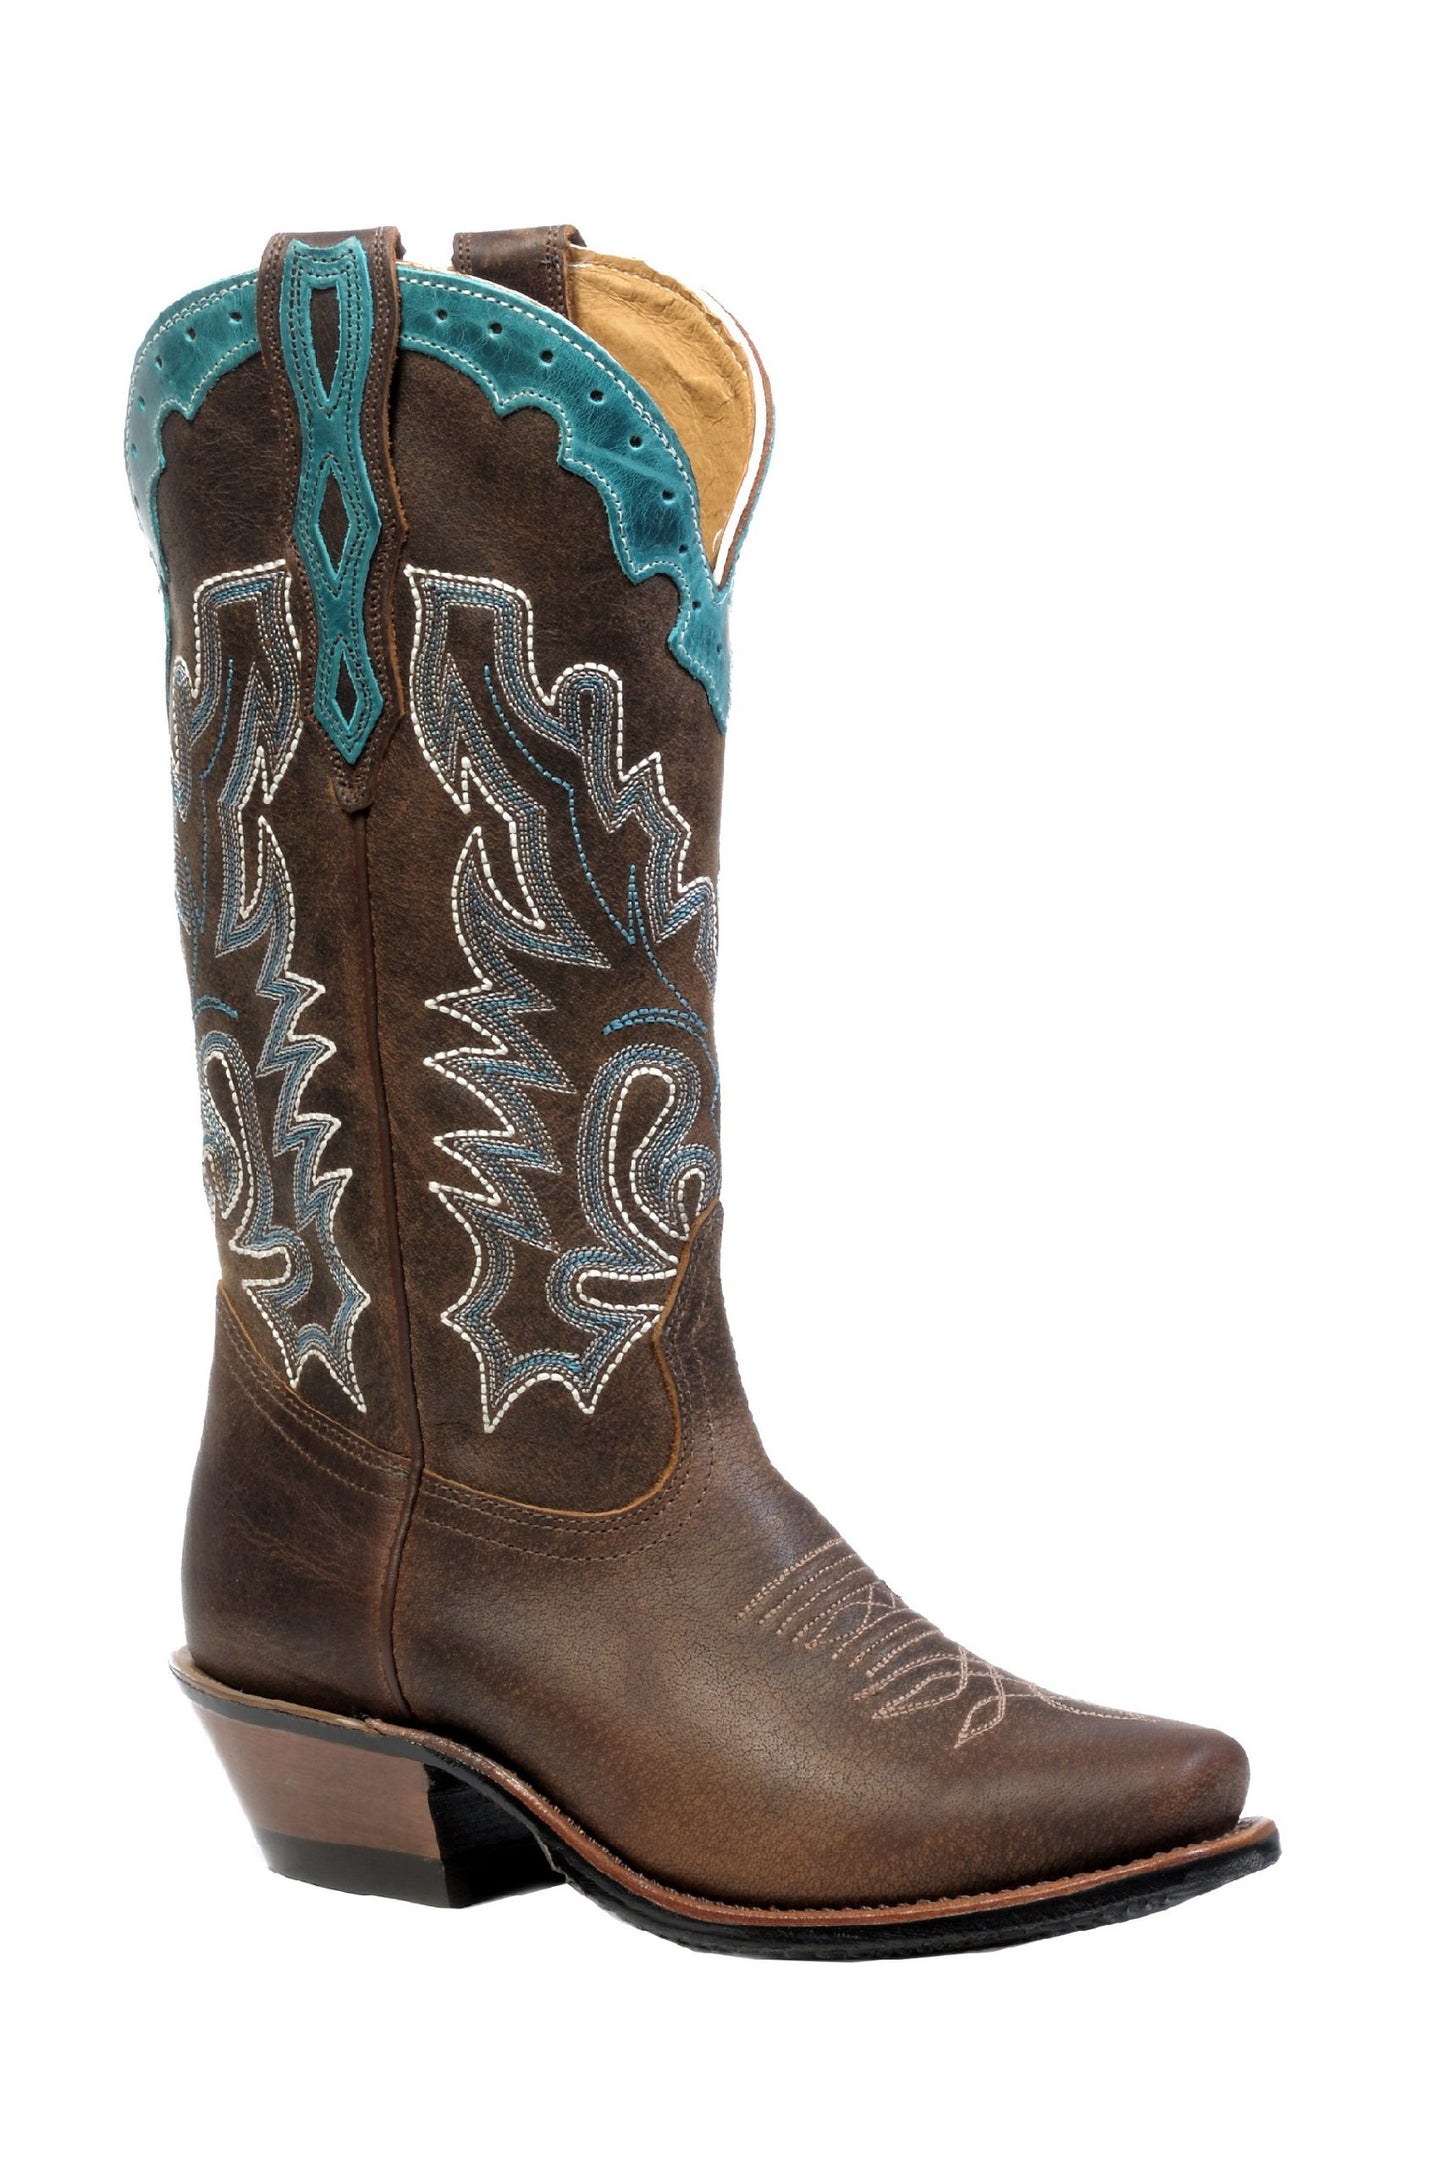 Boot Women's (4361) - 13" Cutter Toe in Sevaggio Wood & West Turqueza